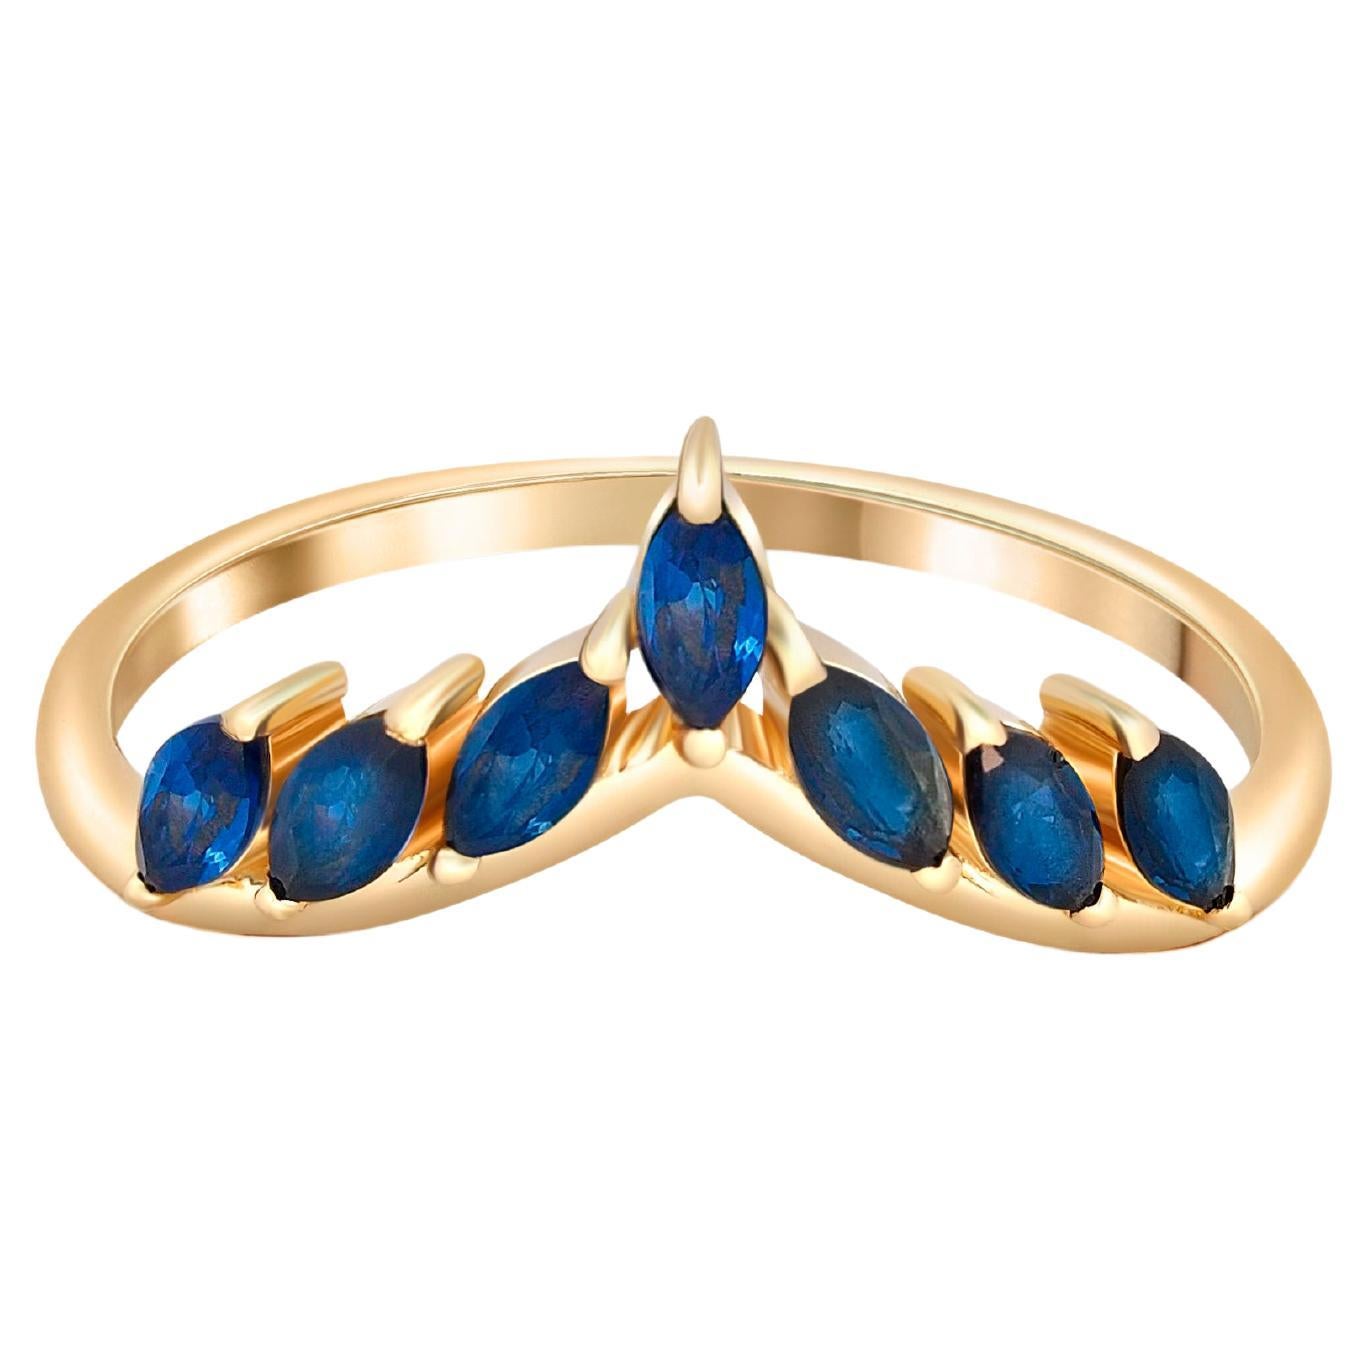 Sapphire Tiara 14k gold ring.  For Sale